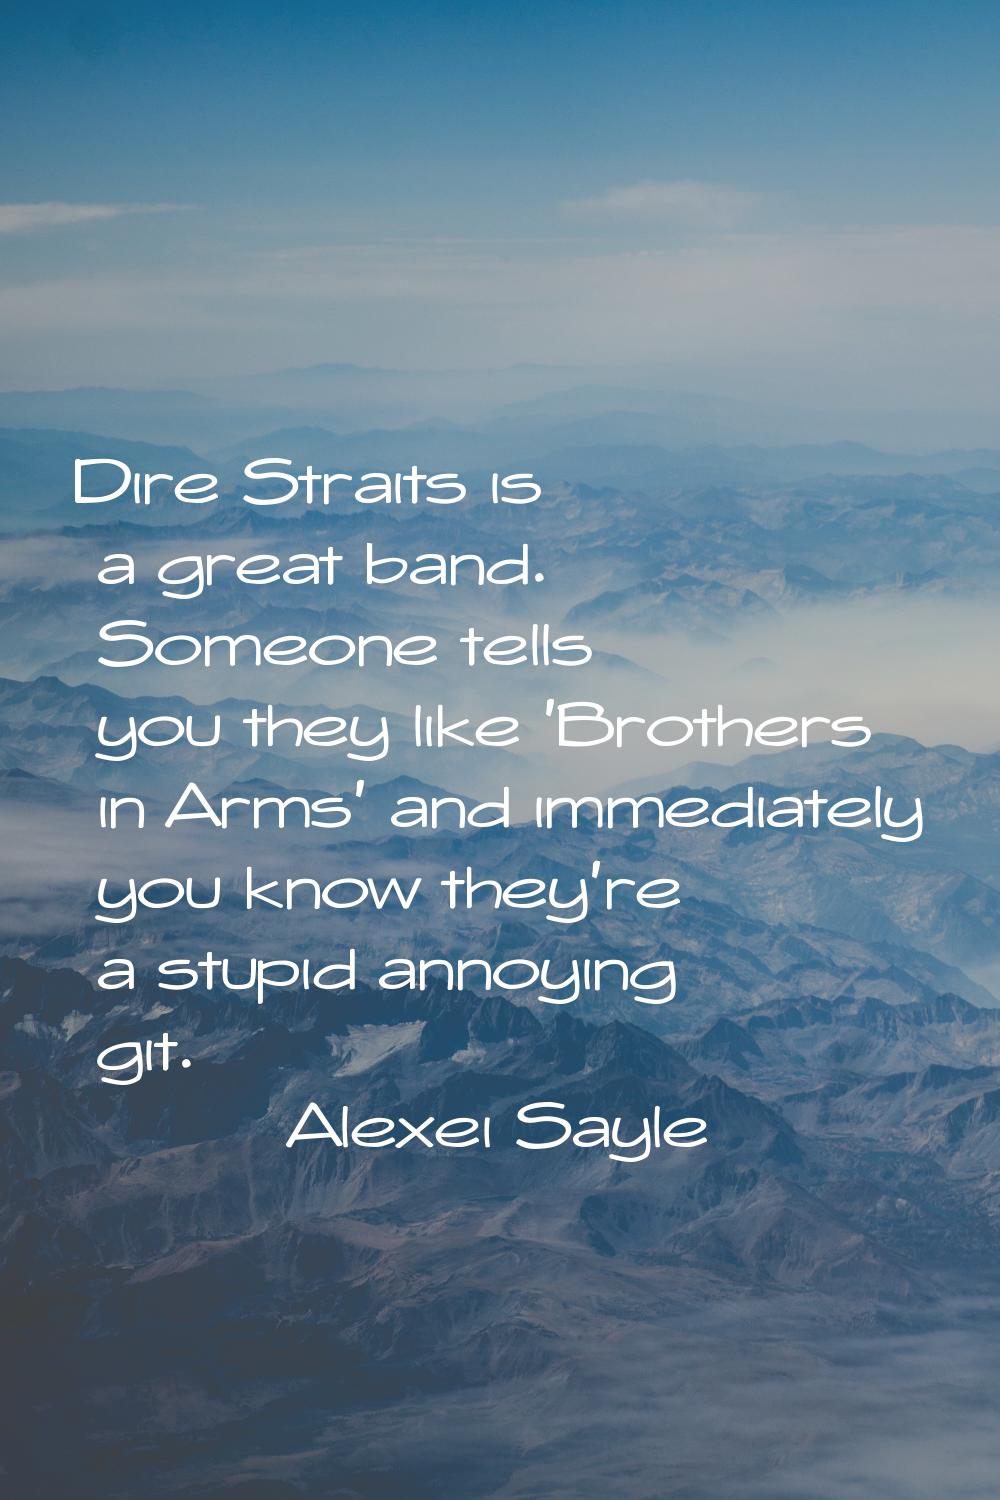 Dire Straits is a great band. Someone tells you they like 'Brothers in Arms' and immediately you kn